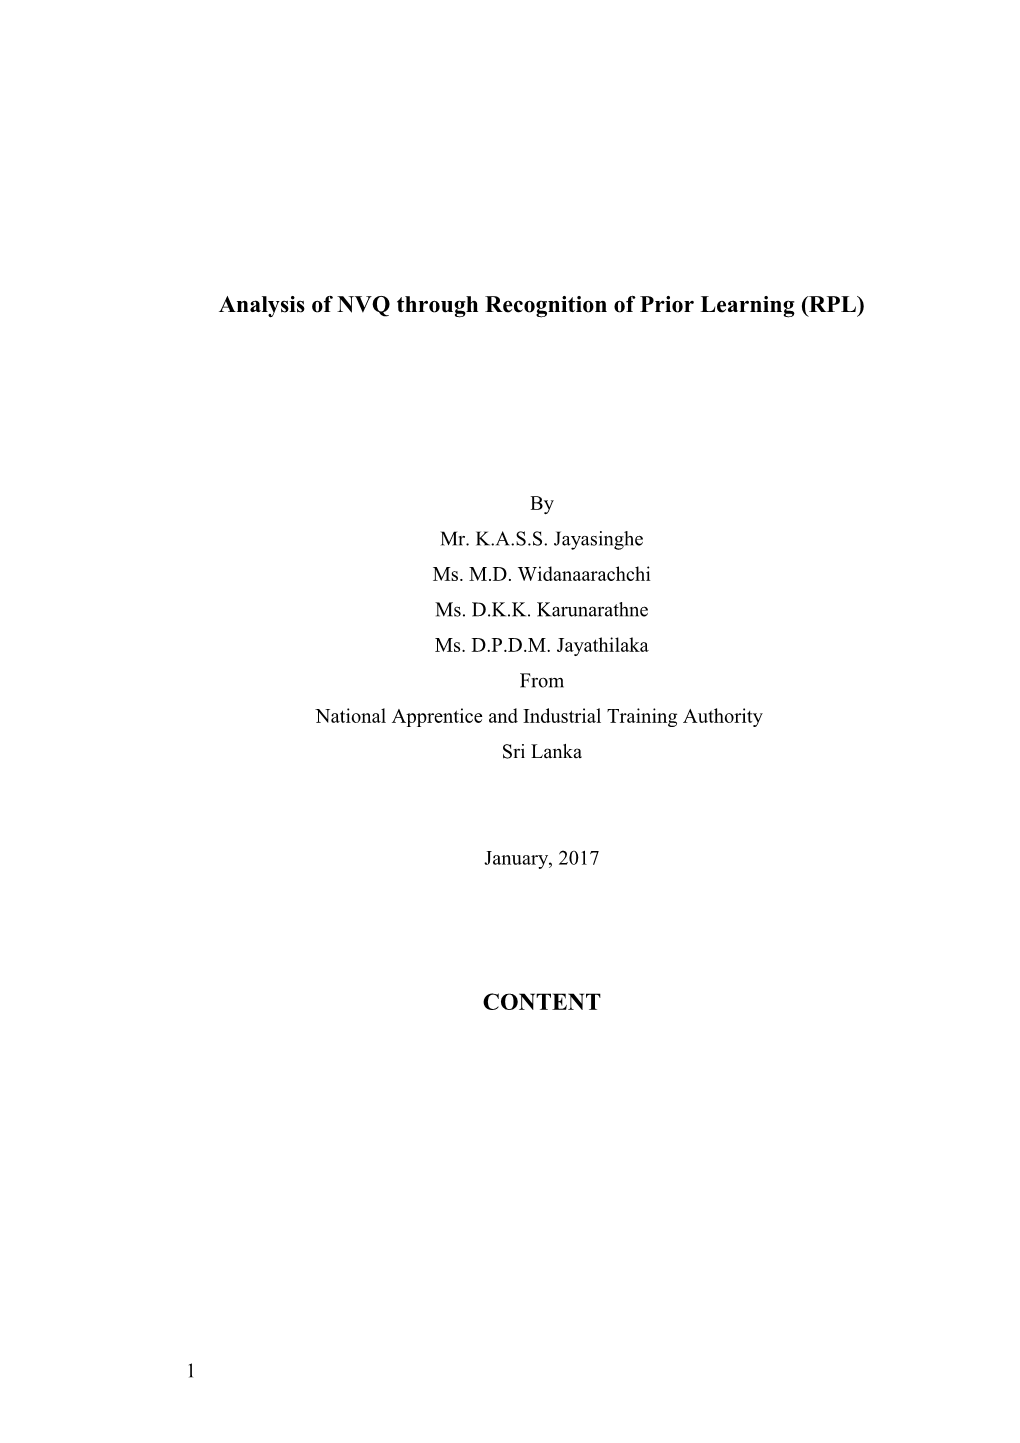 Analysis of NVQ Through Recognition of Prior Learning (RPL)